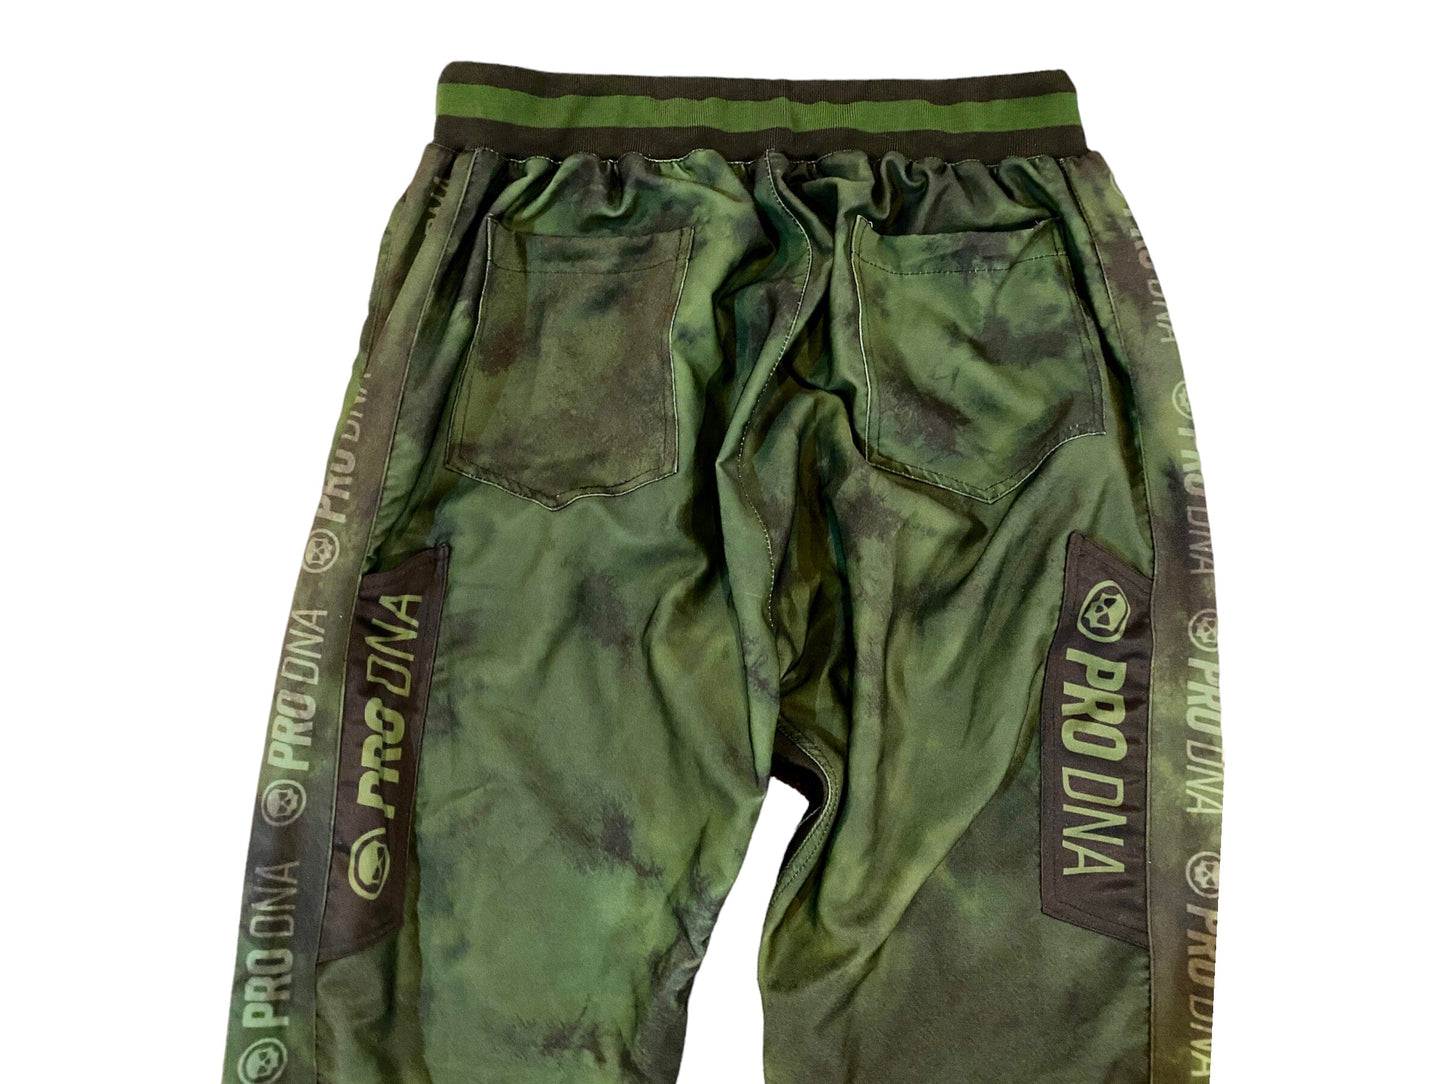 Used New Infamous pro-acp Jogger style Paintball Pants size XXL Paintball Gun from CPXBrosPaintball Buy/Sell/Trade Paintball Markers, Paintball Hoppers, Paintball Masks, and Hormesis Headbands